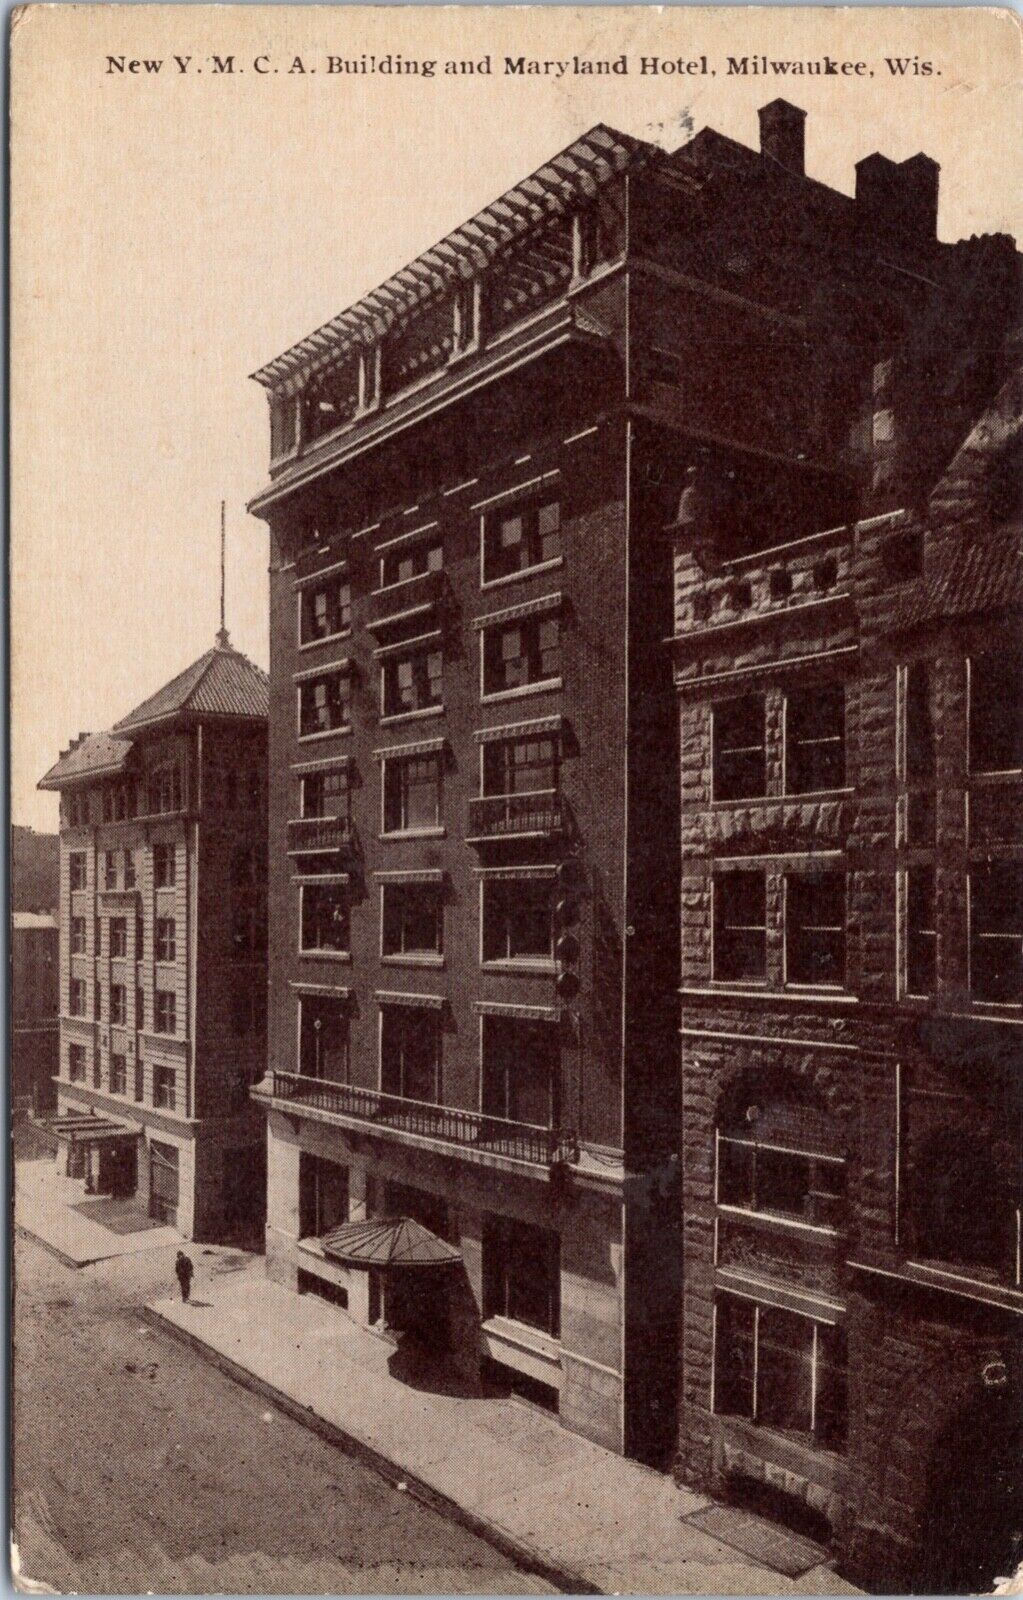 Y.M.C.A. Building Mary Land Hotel  Milwaukee, WIS. 1906  Postcard